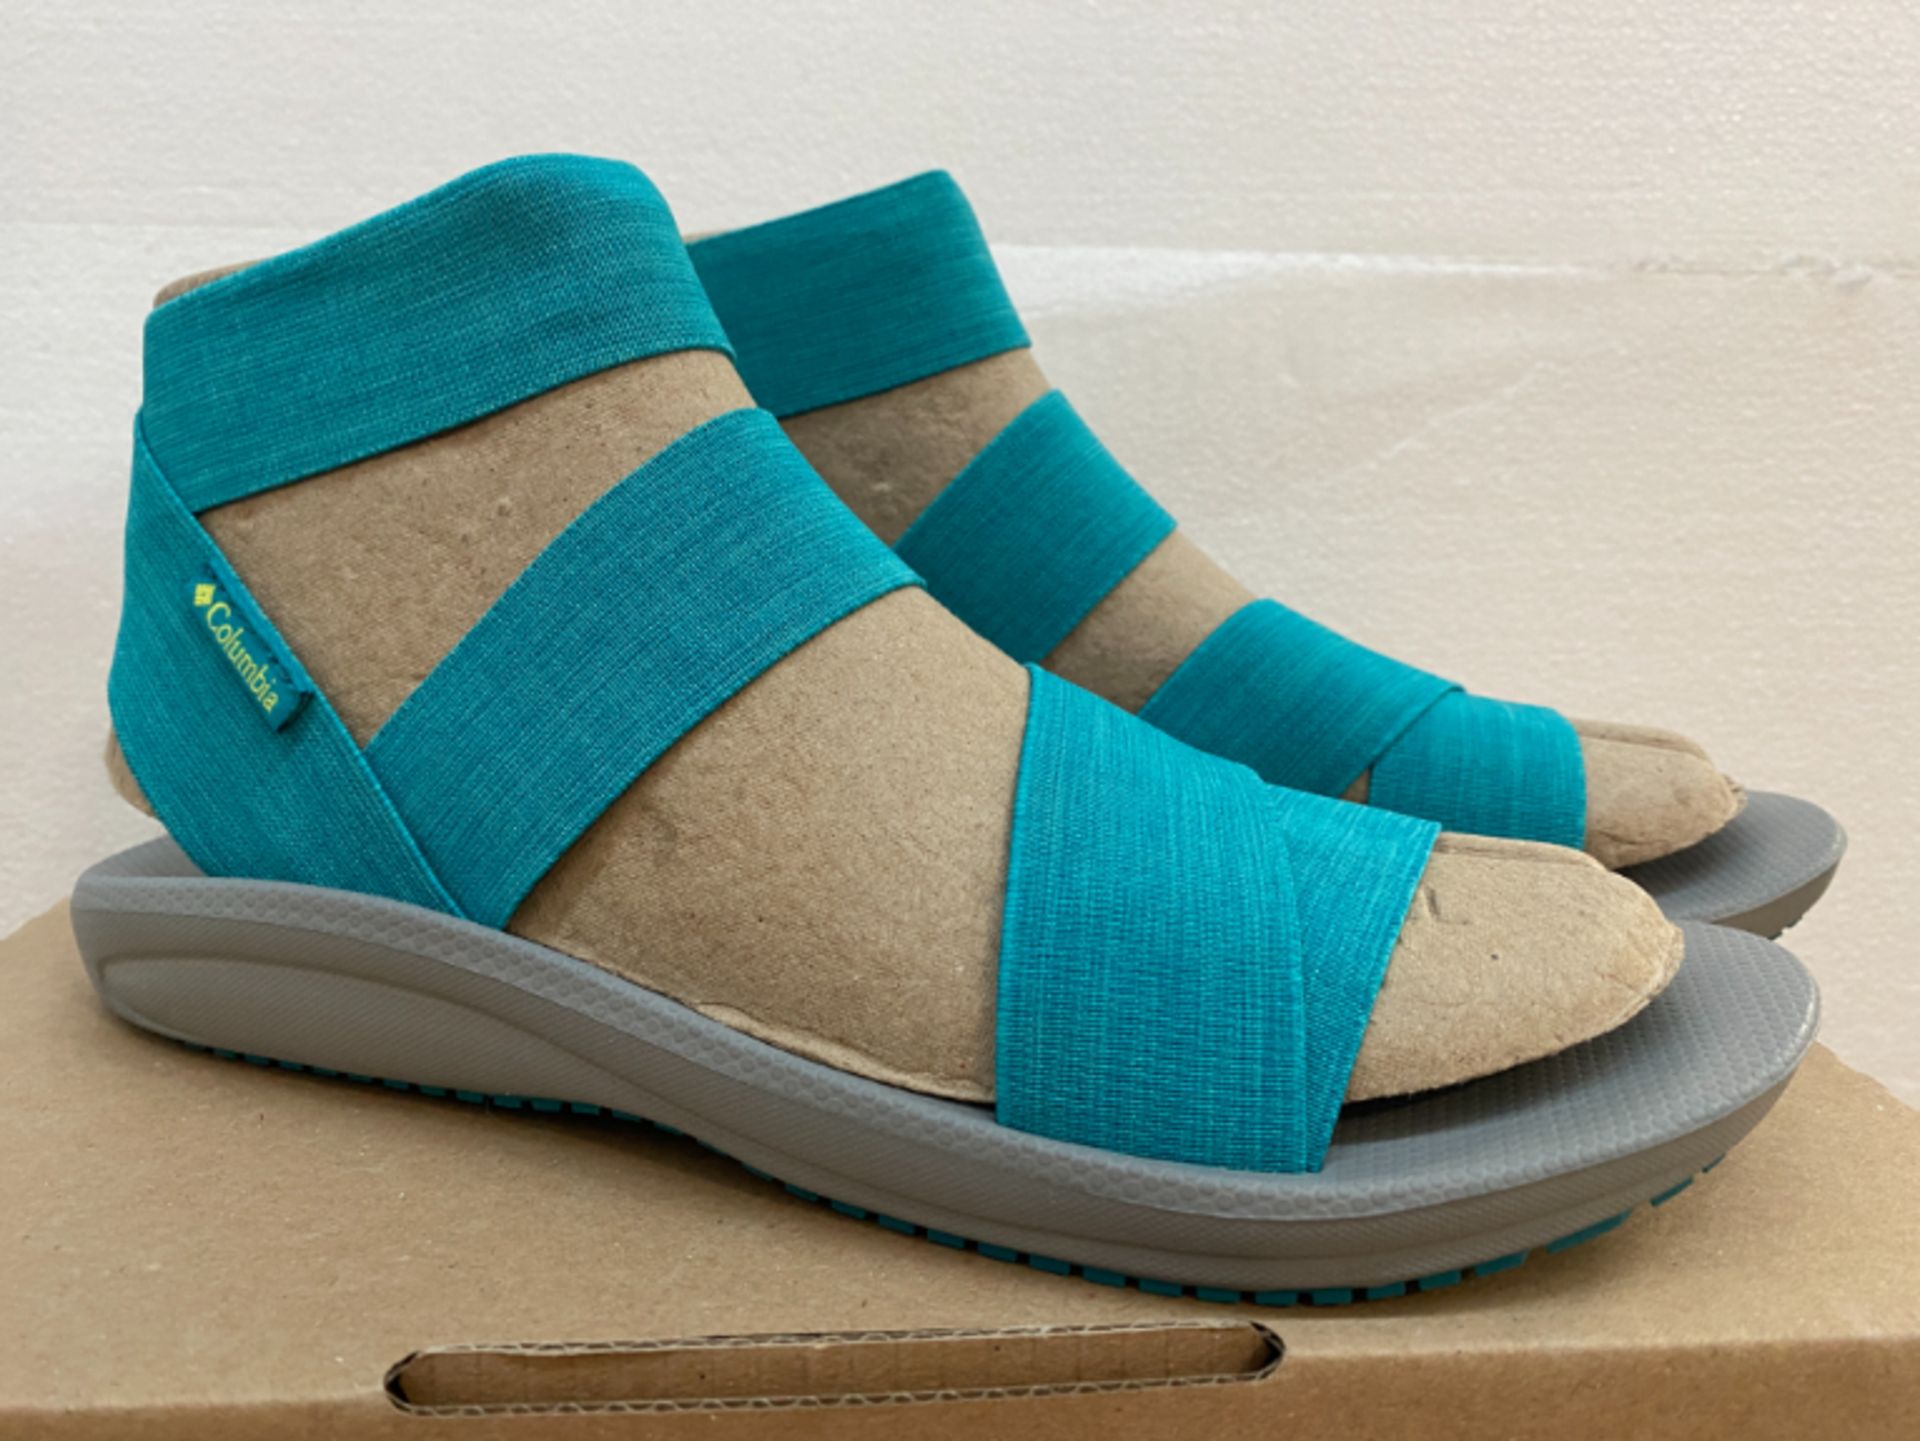 1 LOT TO CONTAIN AN AS NEW BOXED PAIR OF COLUMBIA UK SIZE 6 STRAPPED SANDLE IN AQUA